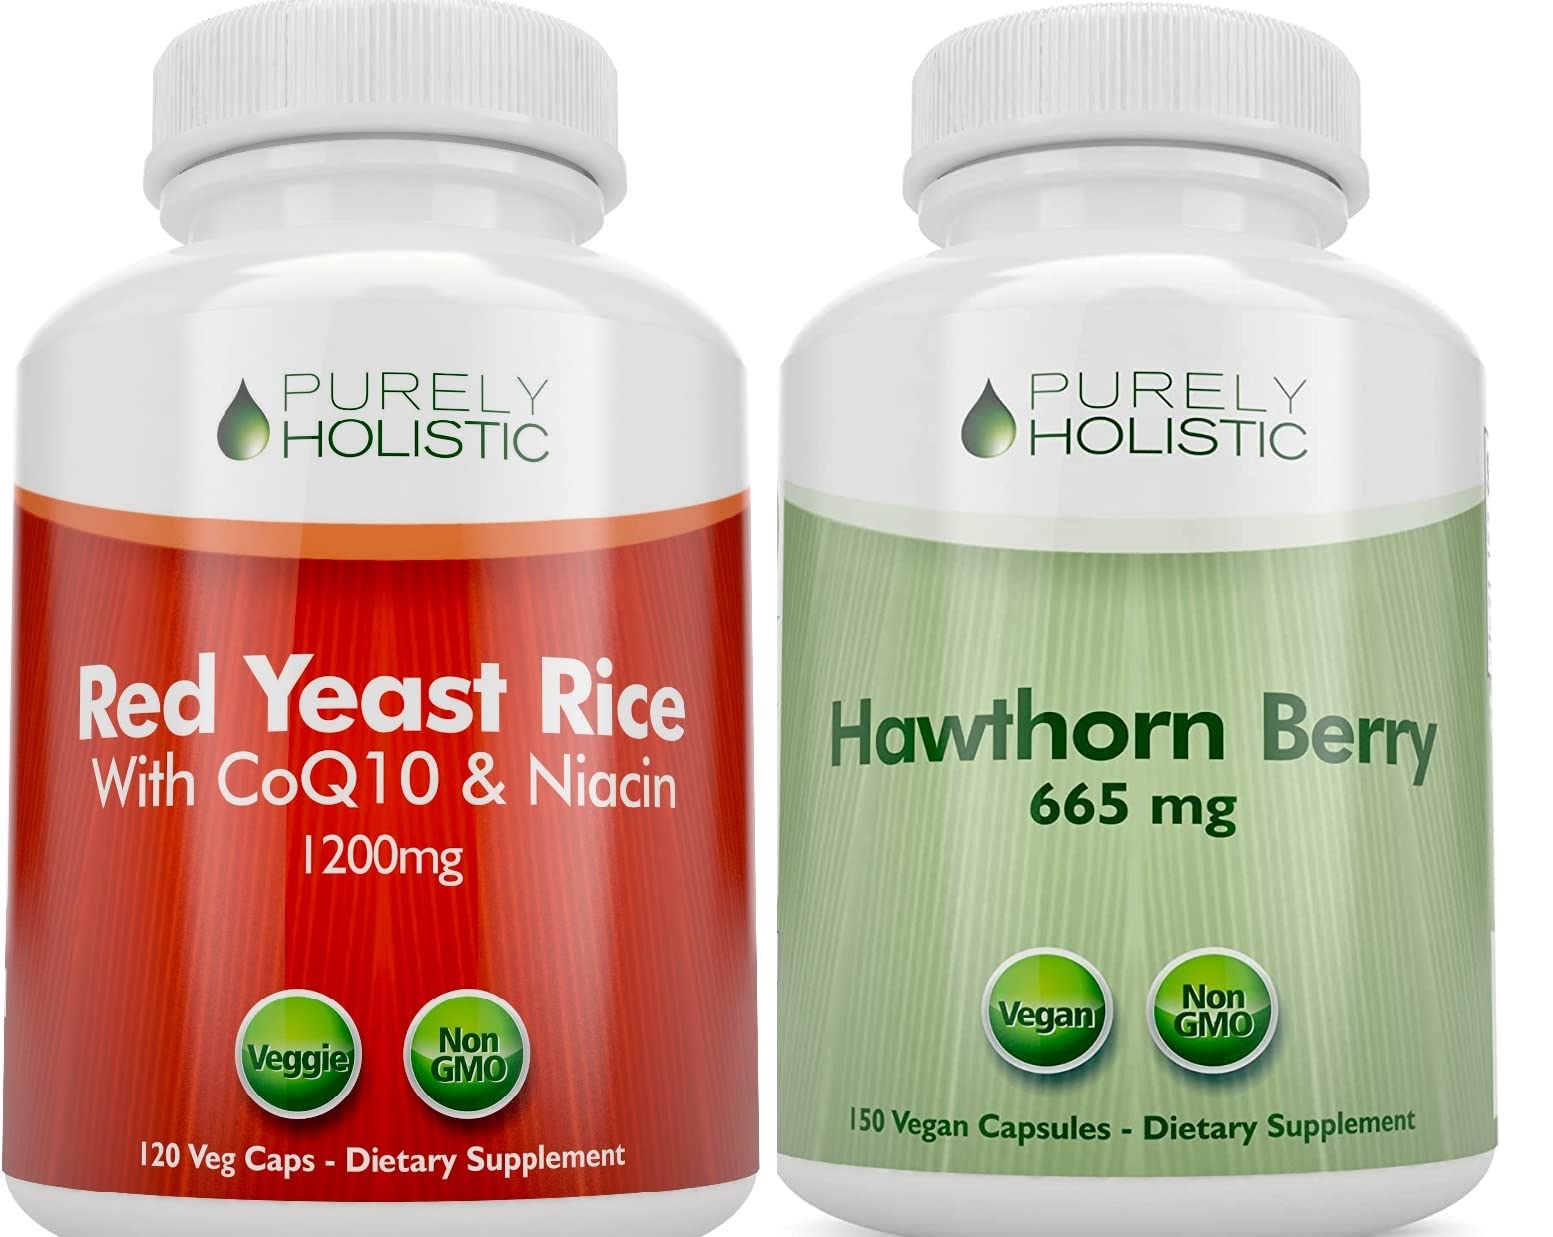 Purely Holistic Red Yeast Rice 1200mg with CoQ10 & Niacin + Hawthorn 665mg Bundle - 270 Capsules - Made in USA